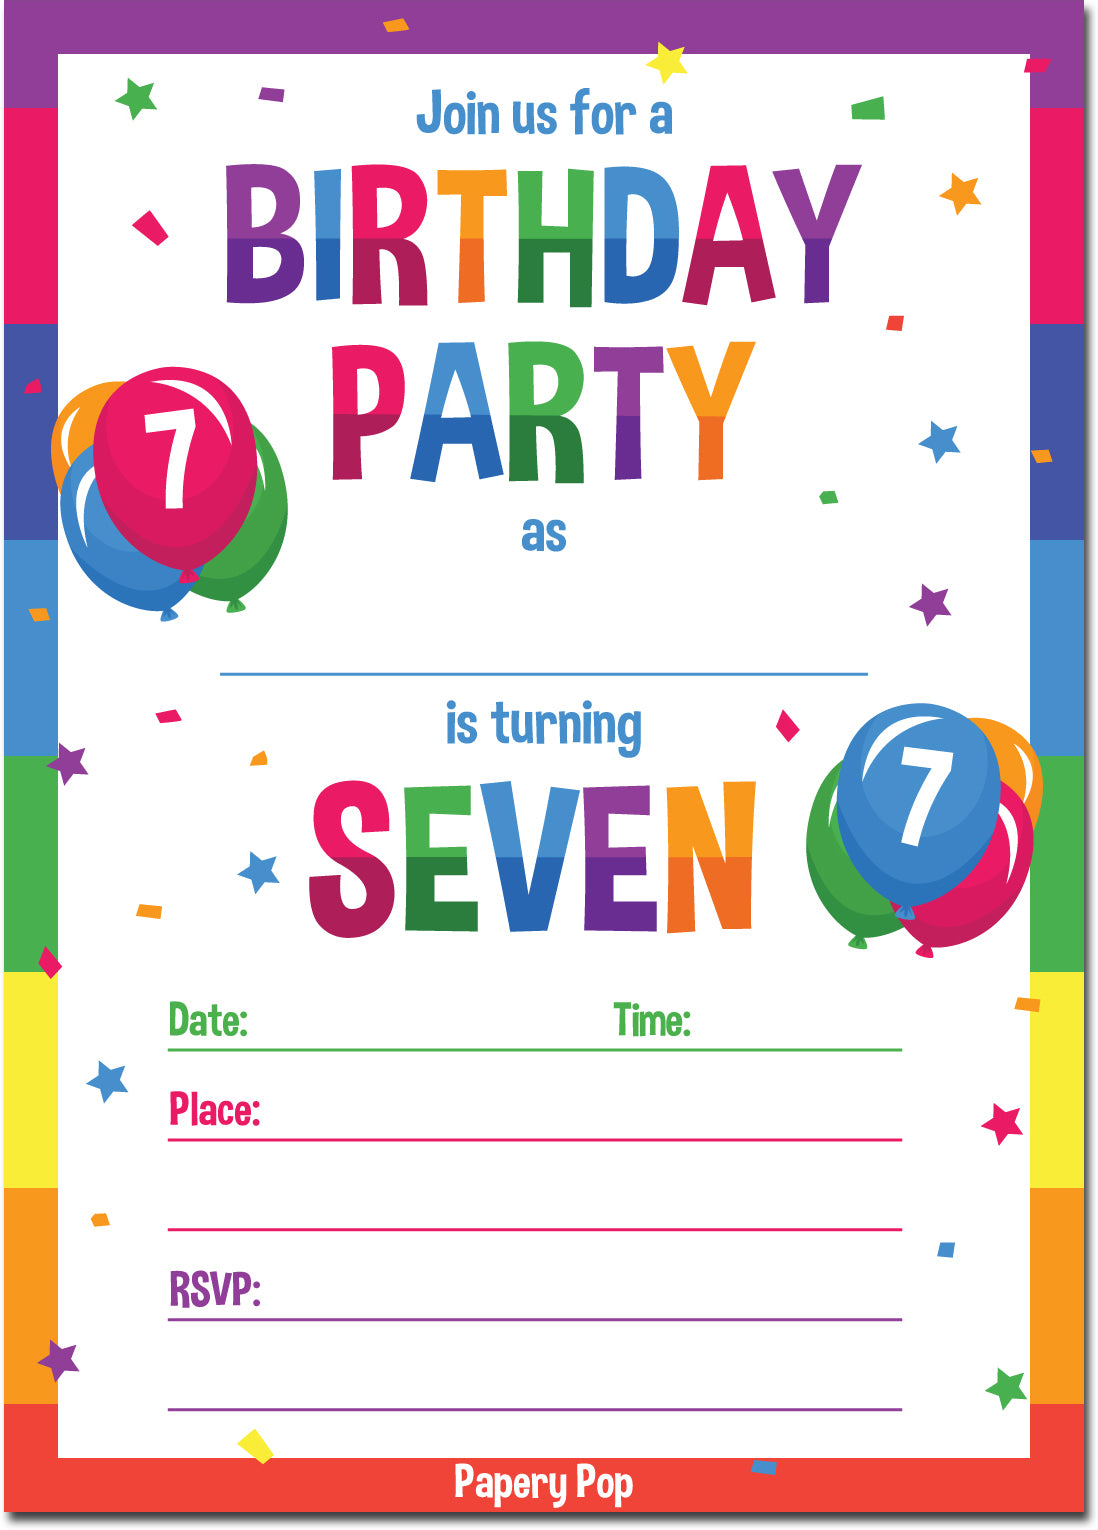 7-year-old-birthday-party-invitations-with-envelopes-15-count-kids